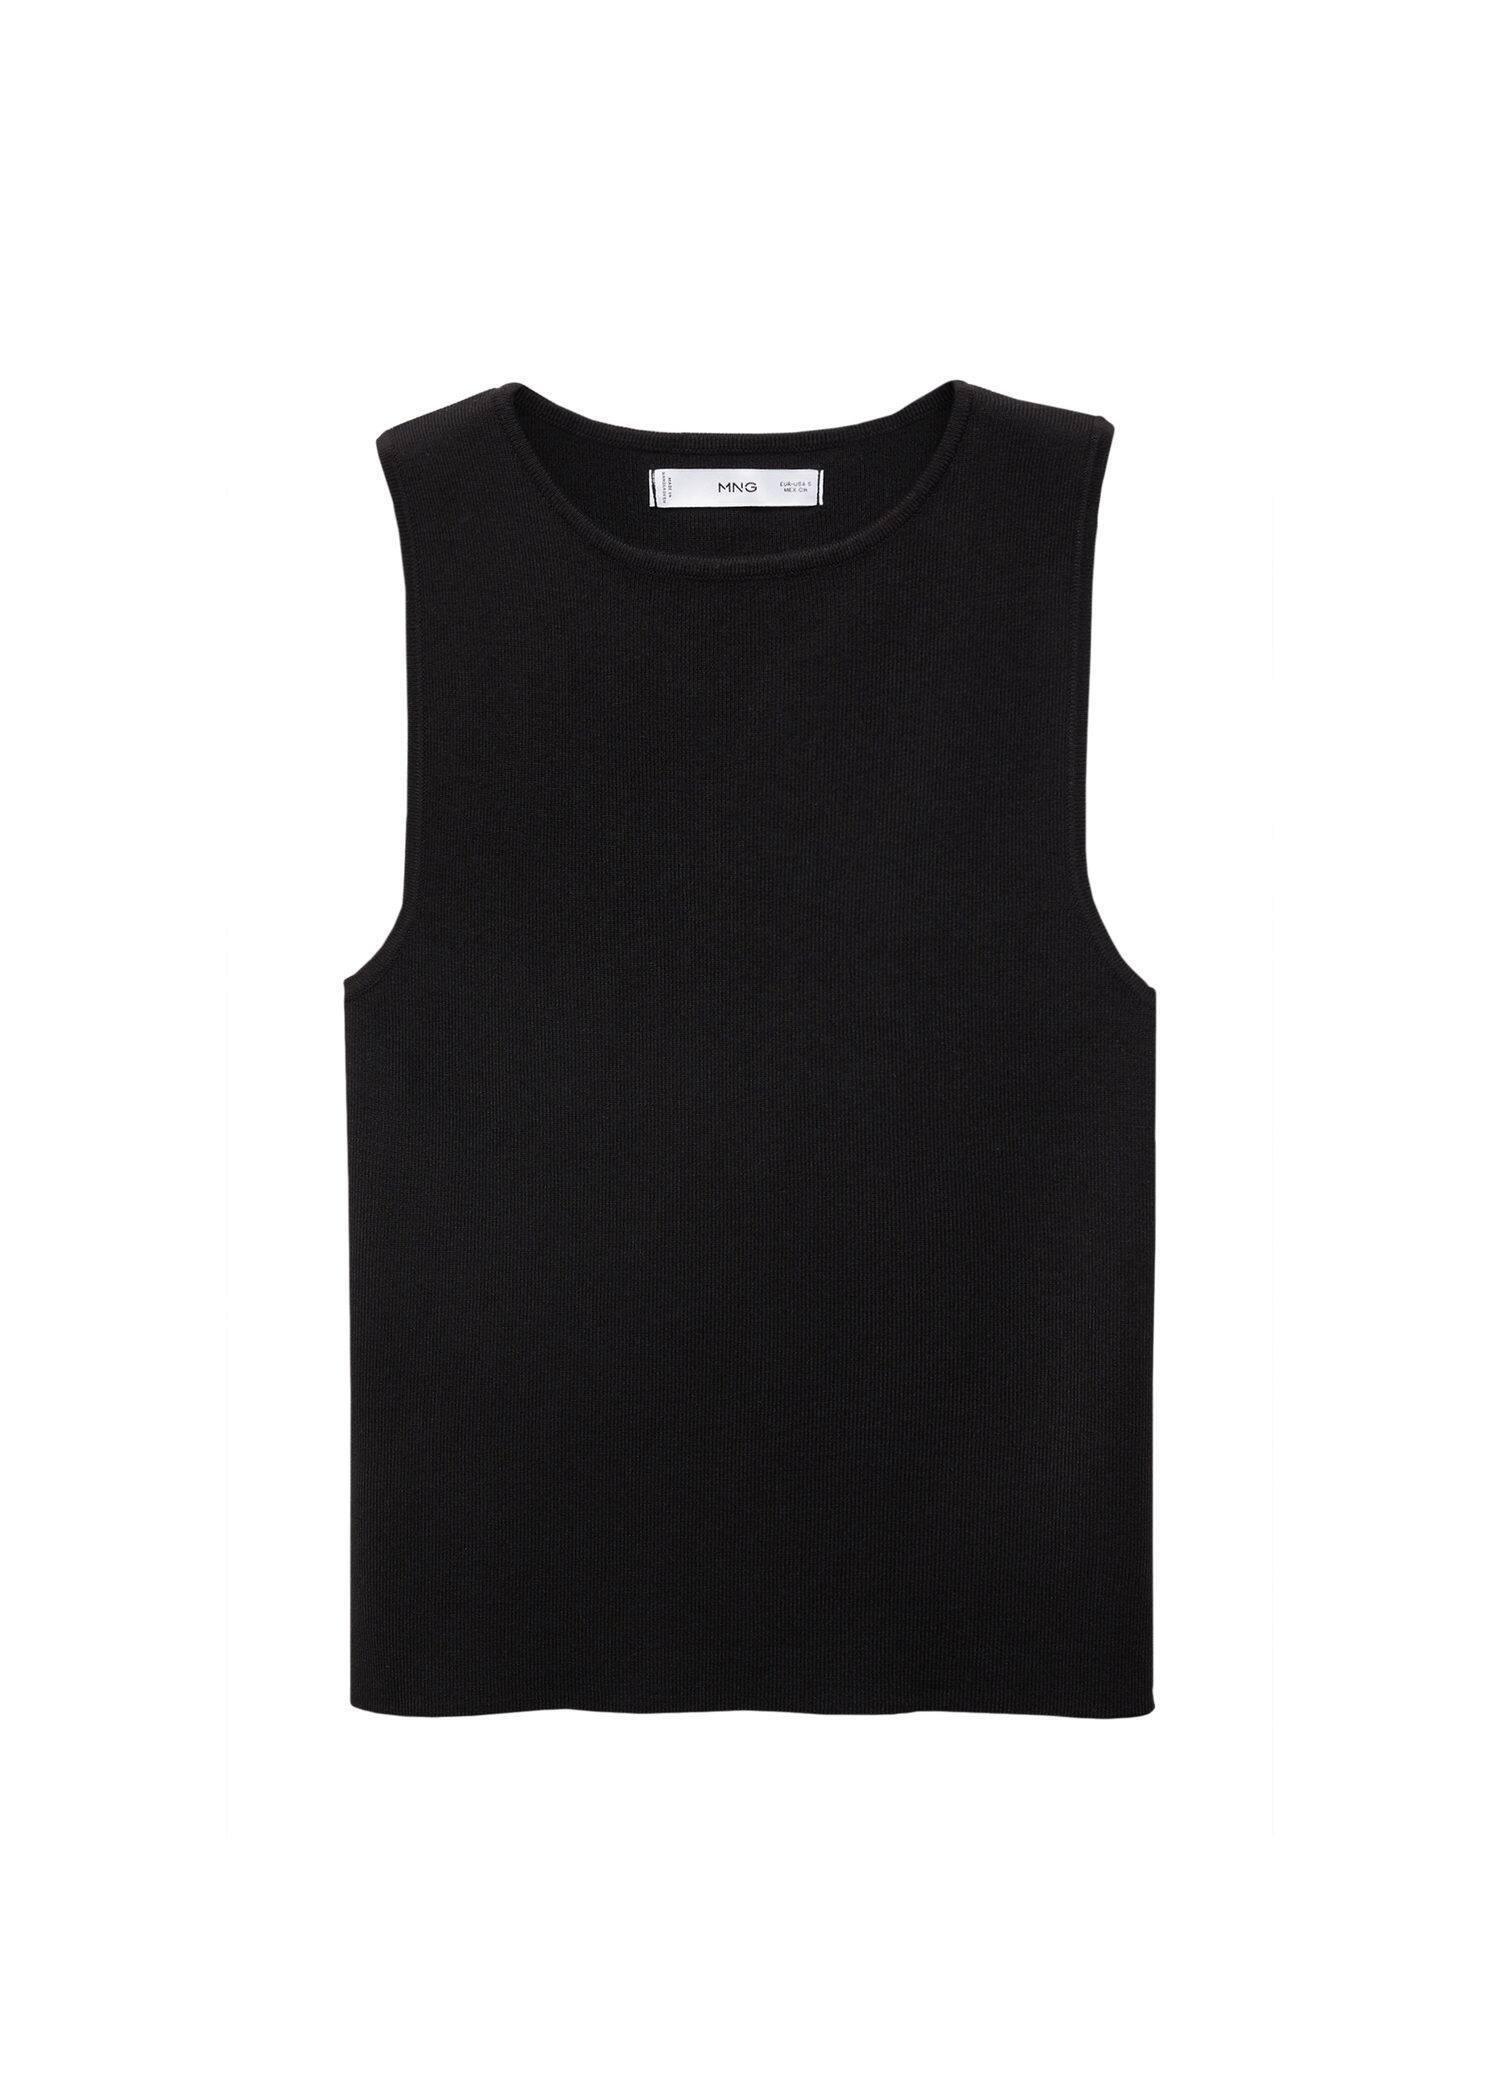 Mango - Black Knitted Top With Wide Straps